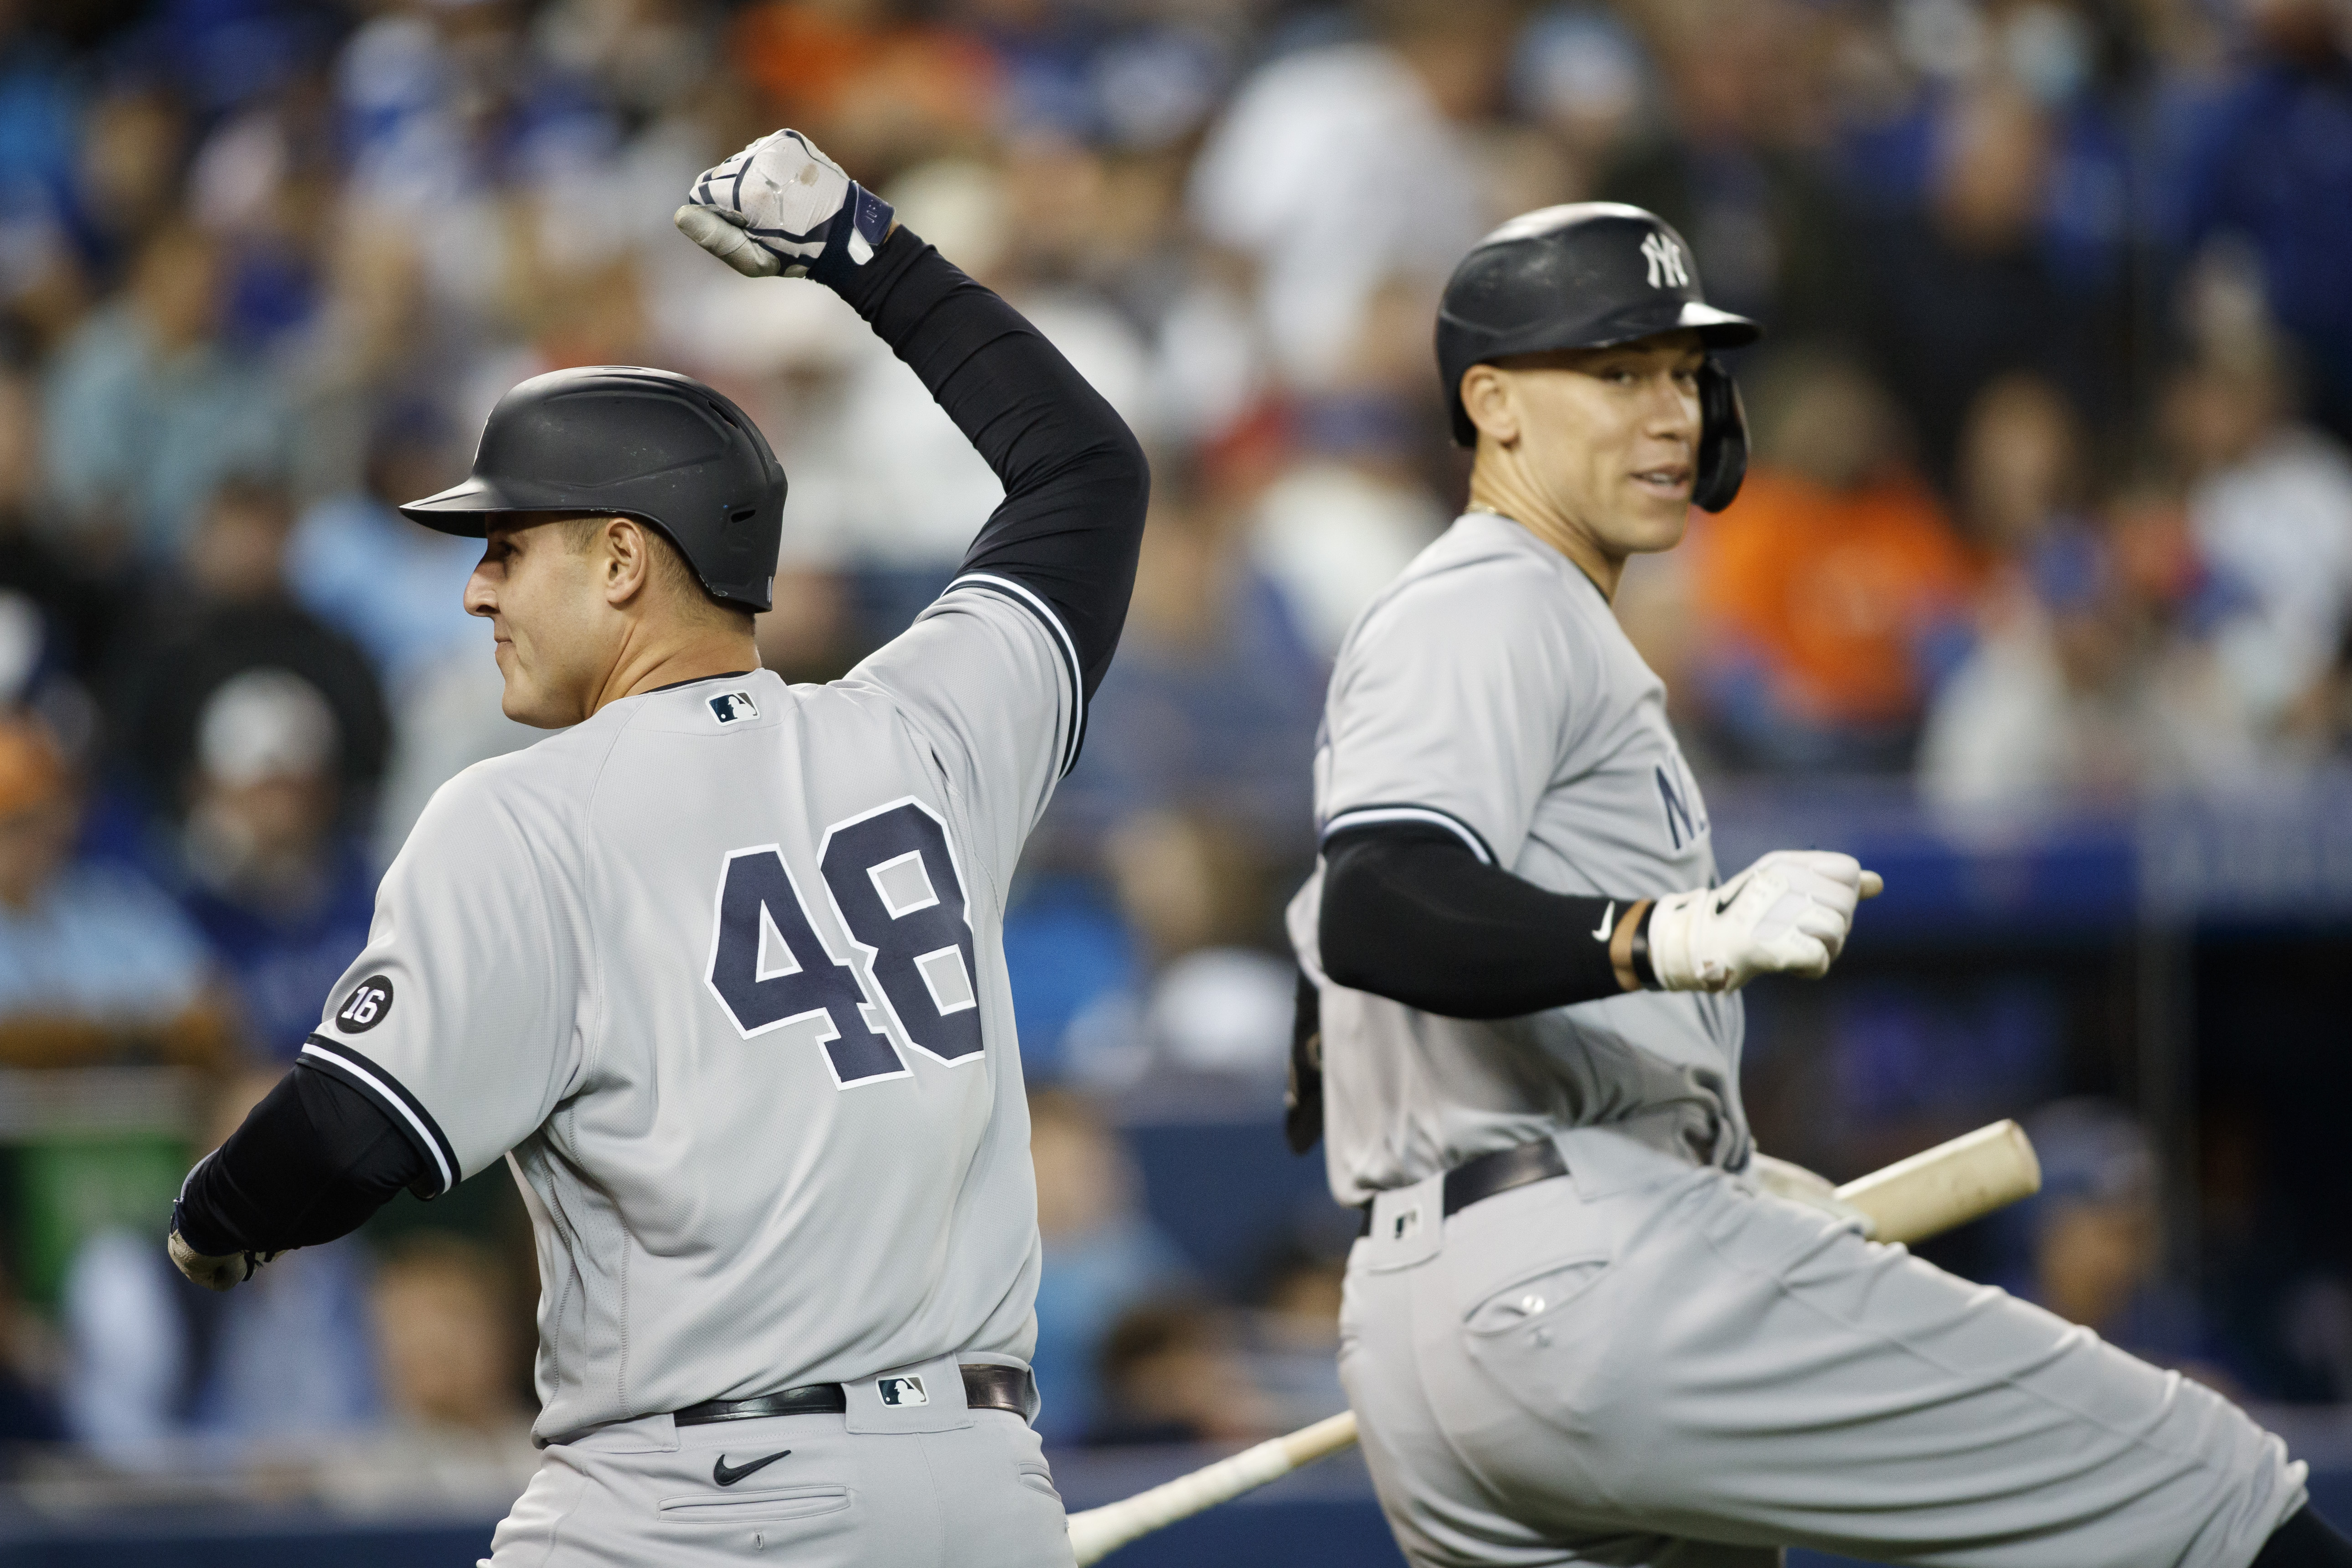 Judge hits fourth homer of the series to lead Yankees over Blue